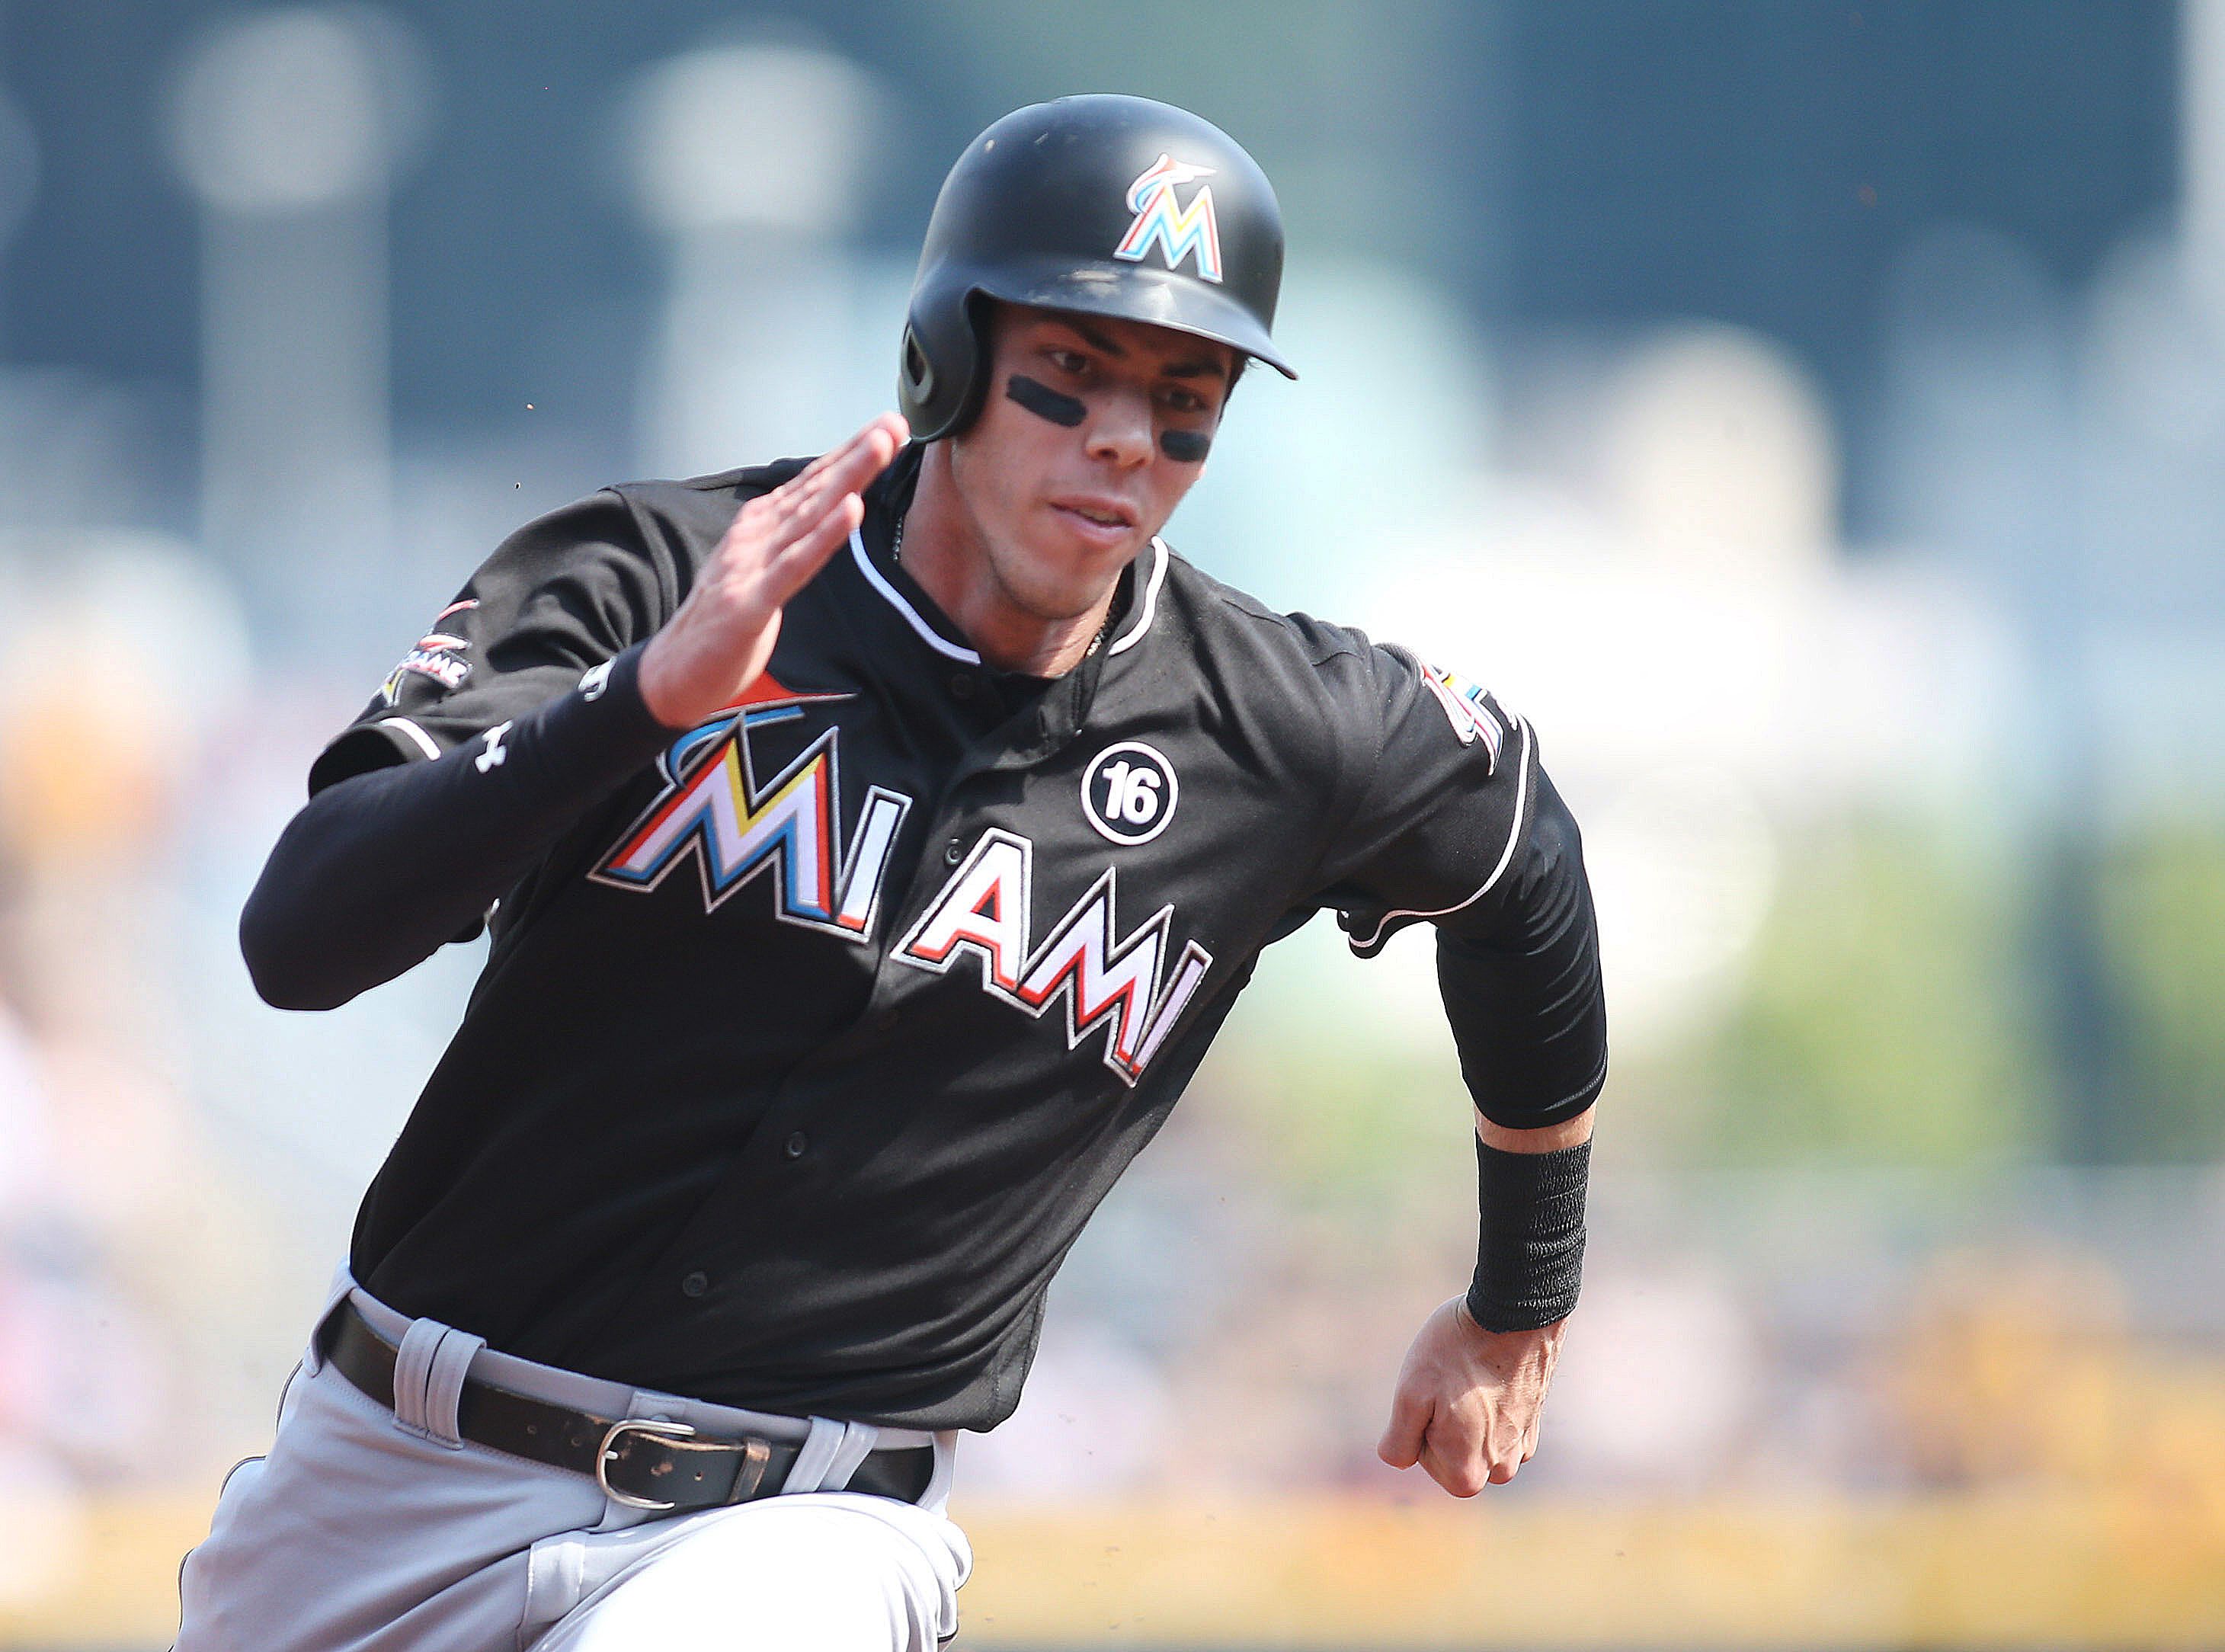 Marlins Continue Fire Sale, Trade OF Christian Yelich to Brewers